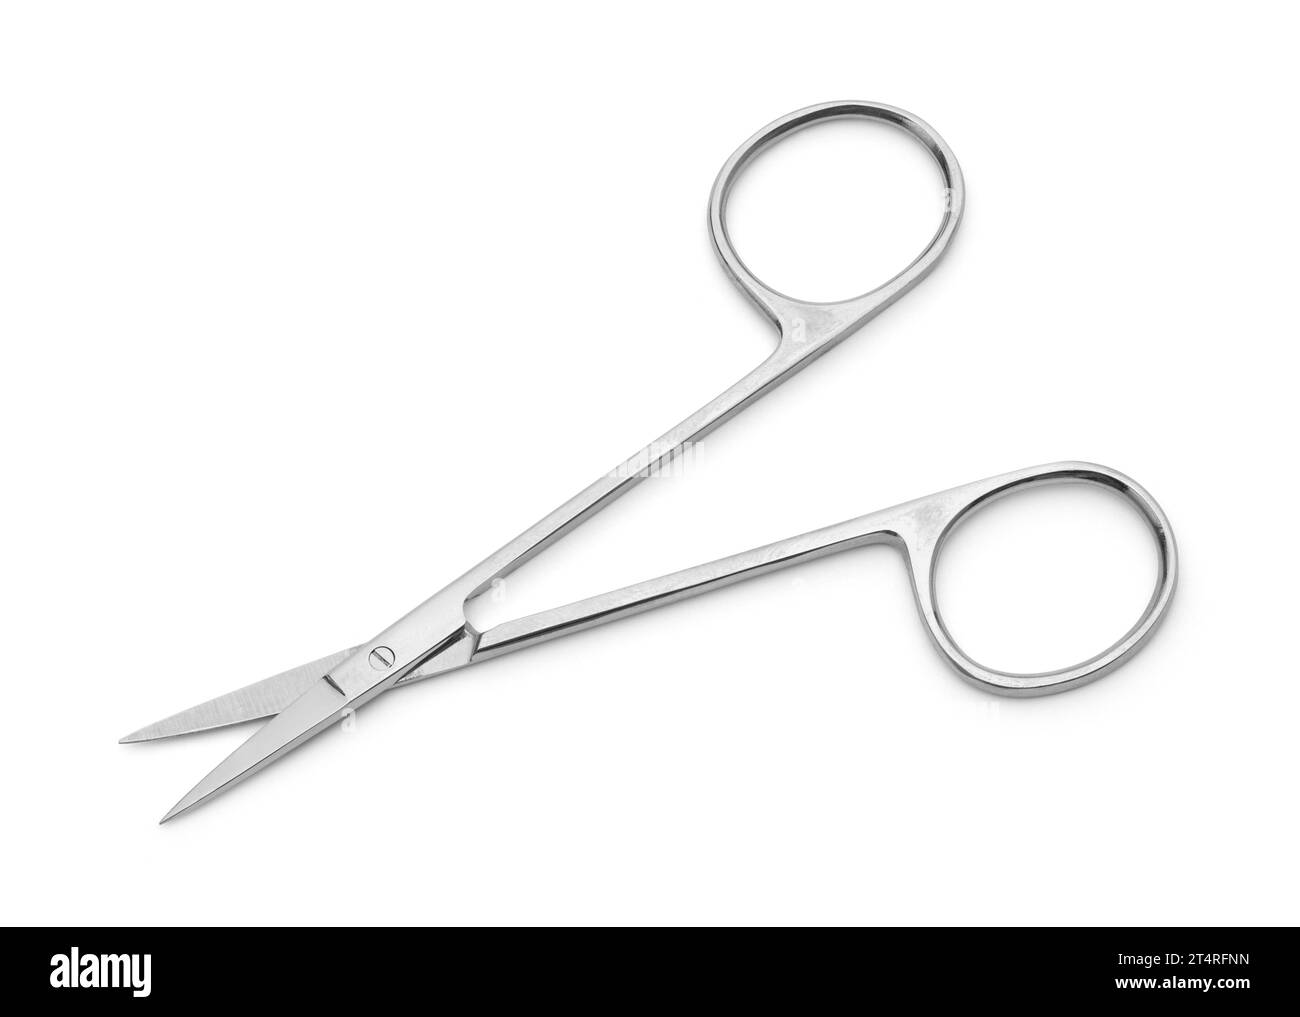 Open Metal Manicure Scissors Cut Out on White. Stock Photo